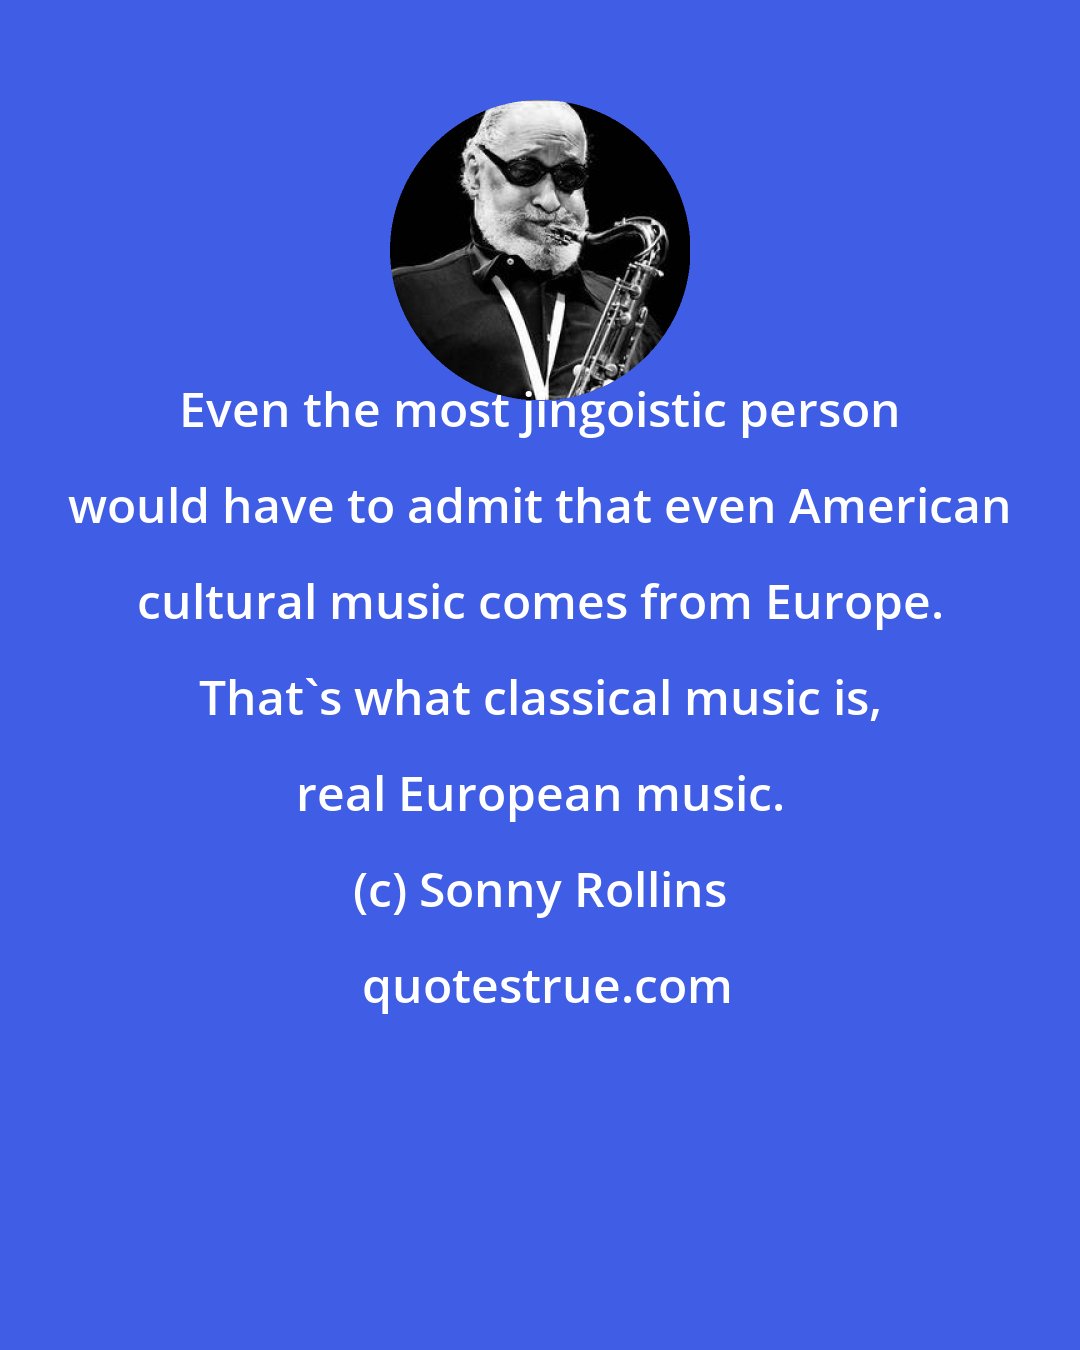 Sonny Rollins: Even the most jingoistic person would have to admit that even American cultural music comes from Europe. That's what classical music is, real European music.